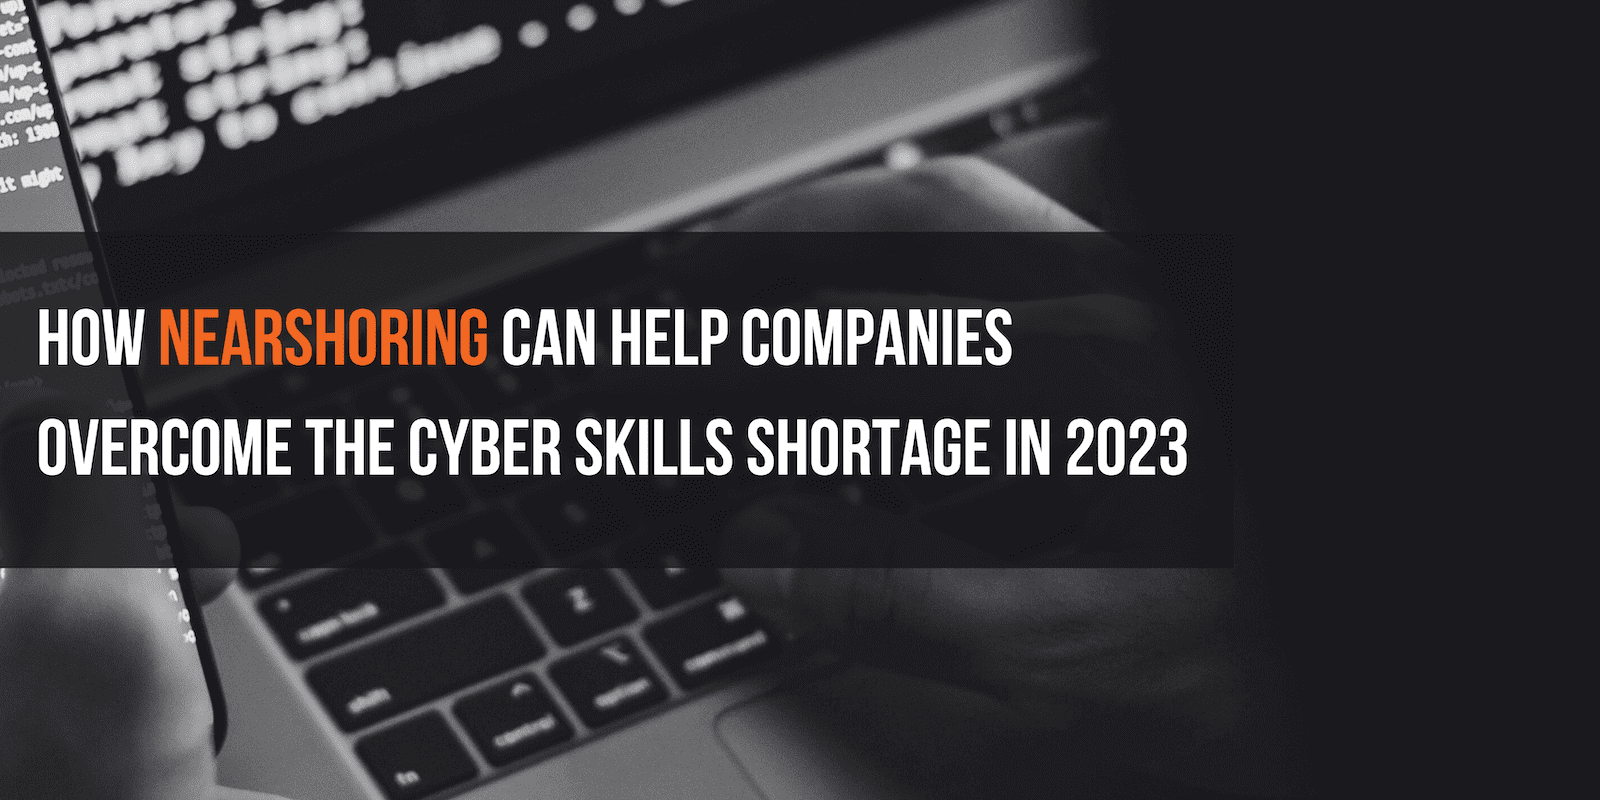 How Nearshoring Can Help Companies Overcome the Cyber Skills Shortage in 2023